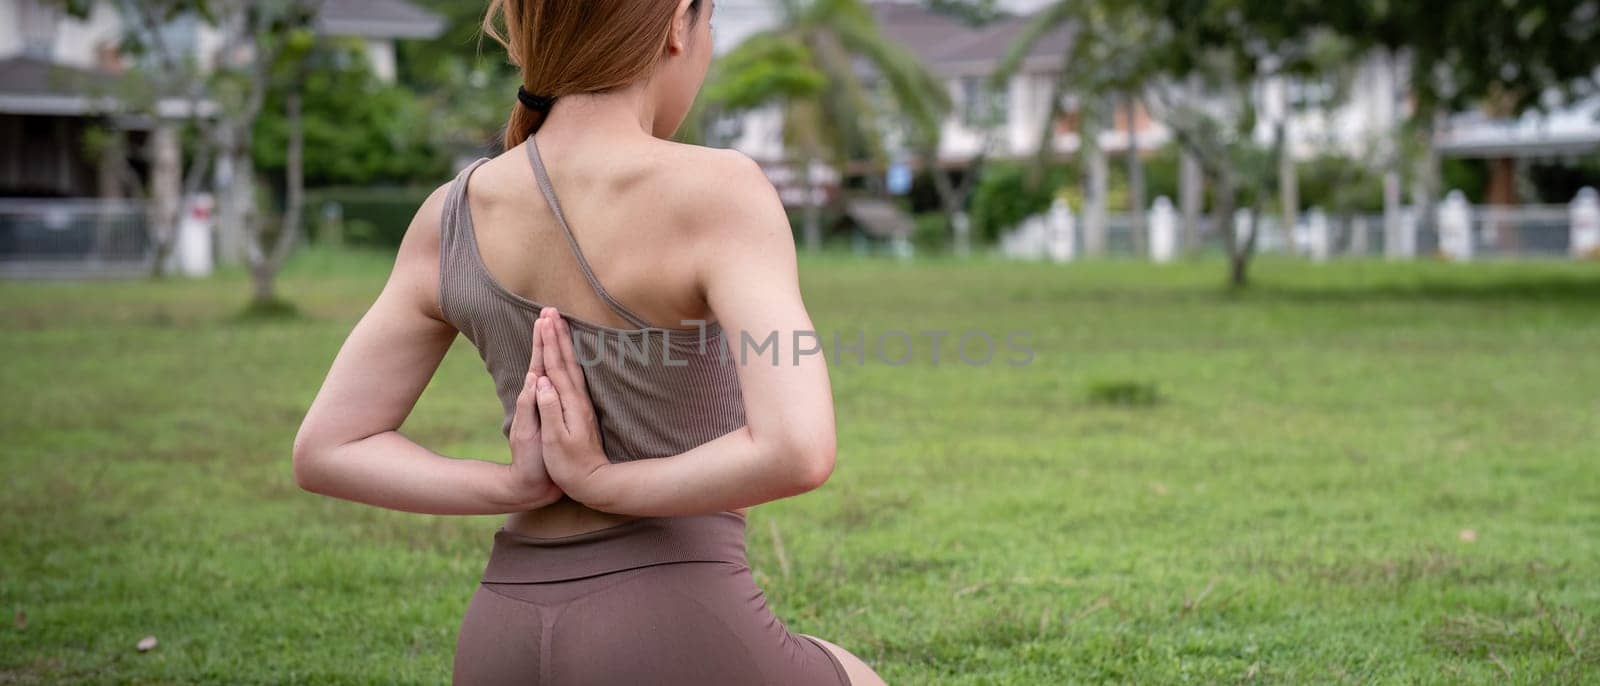 Woman practice yoga in a park, focusing on stretching and healthy living. Outdoor fitness and wellness activity promoting mindfulness and a peaceful lifestyle in a natural environment.